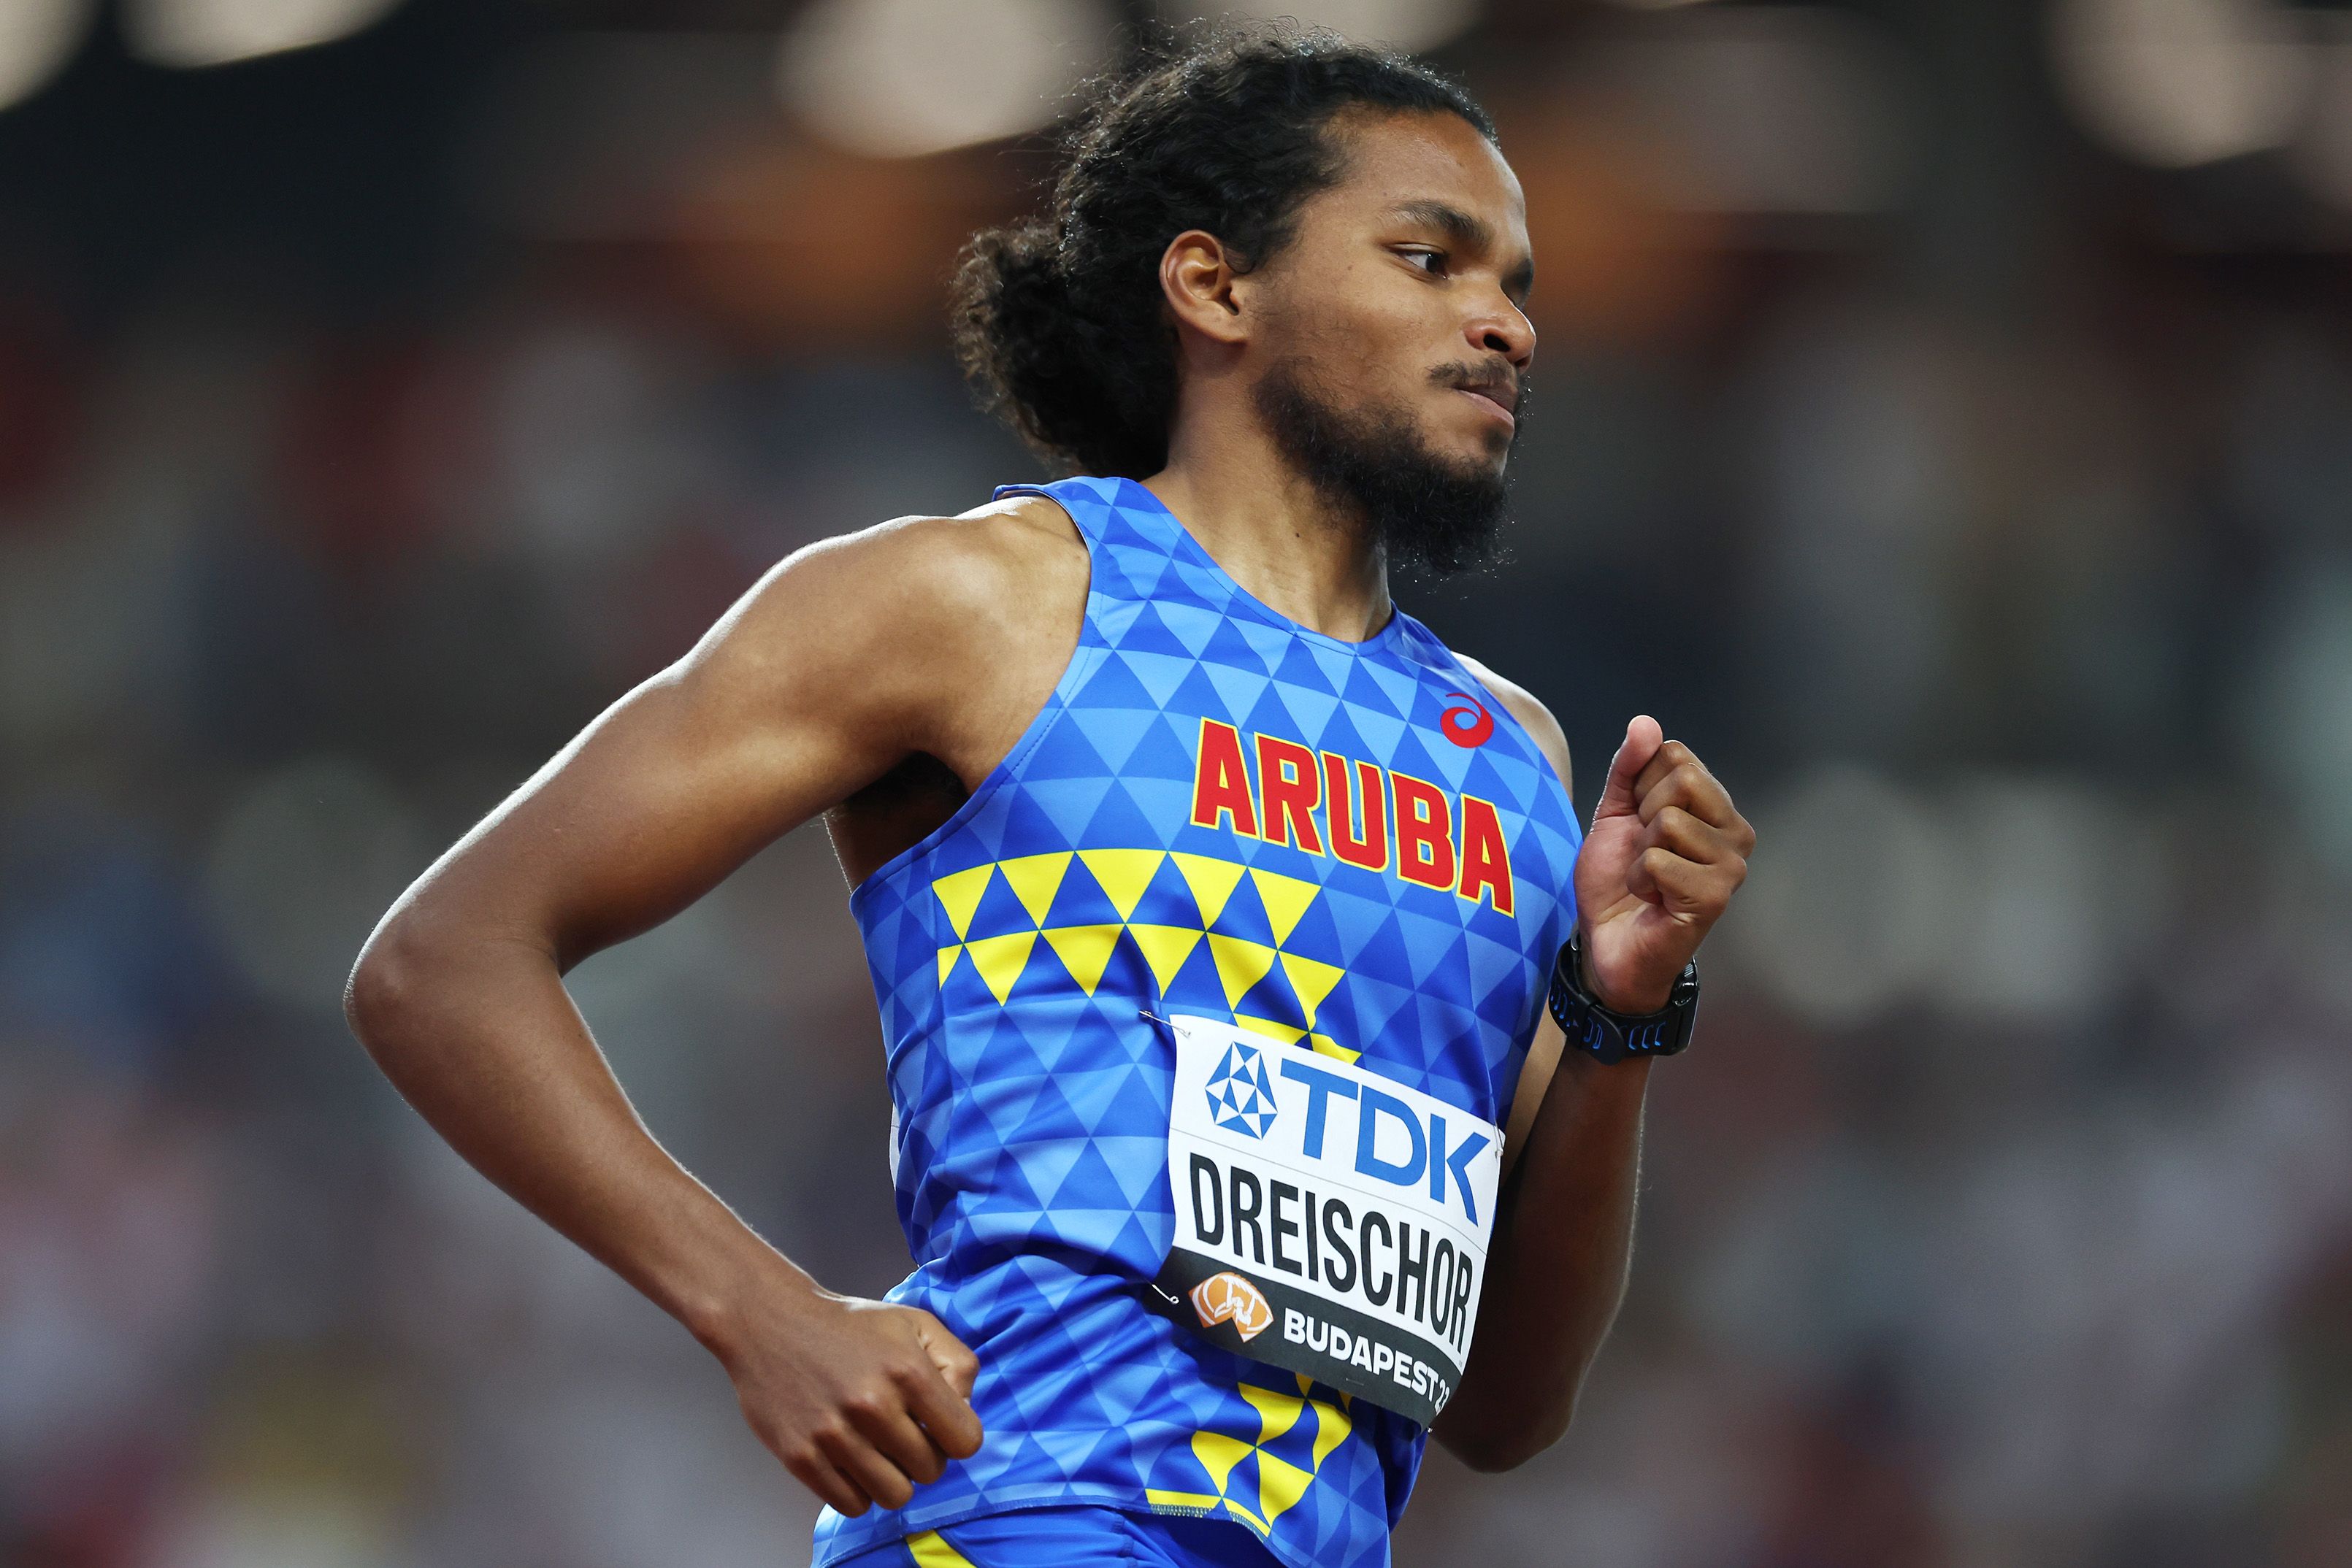 How to Watch 2023 World Athletics Championships